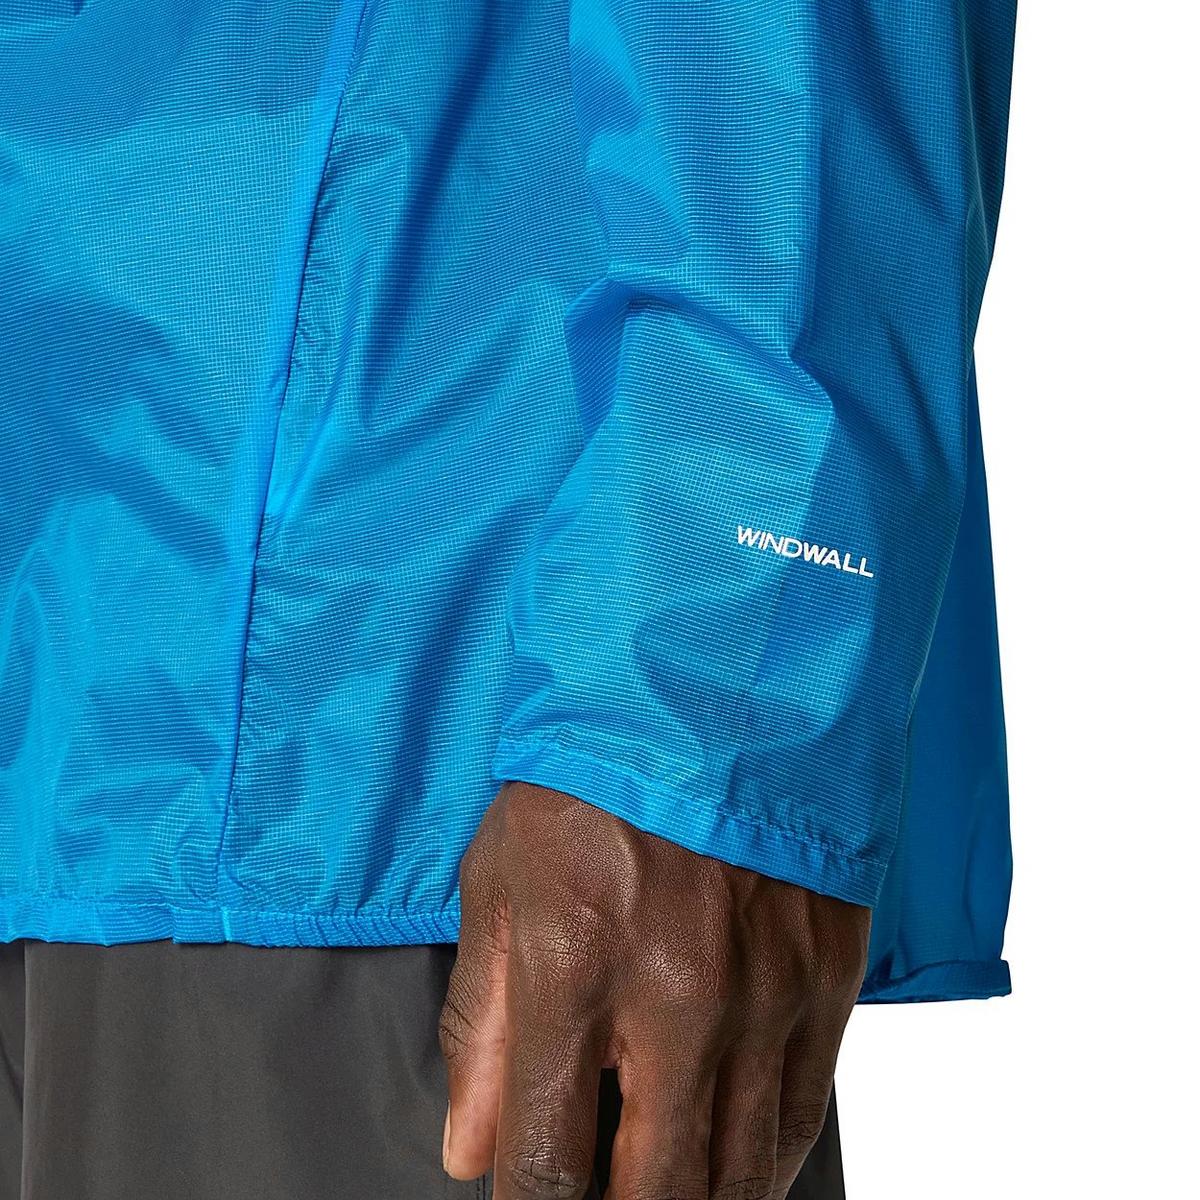 The North Face Men's Windstream Shell Jacket - Blue